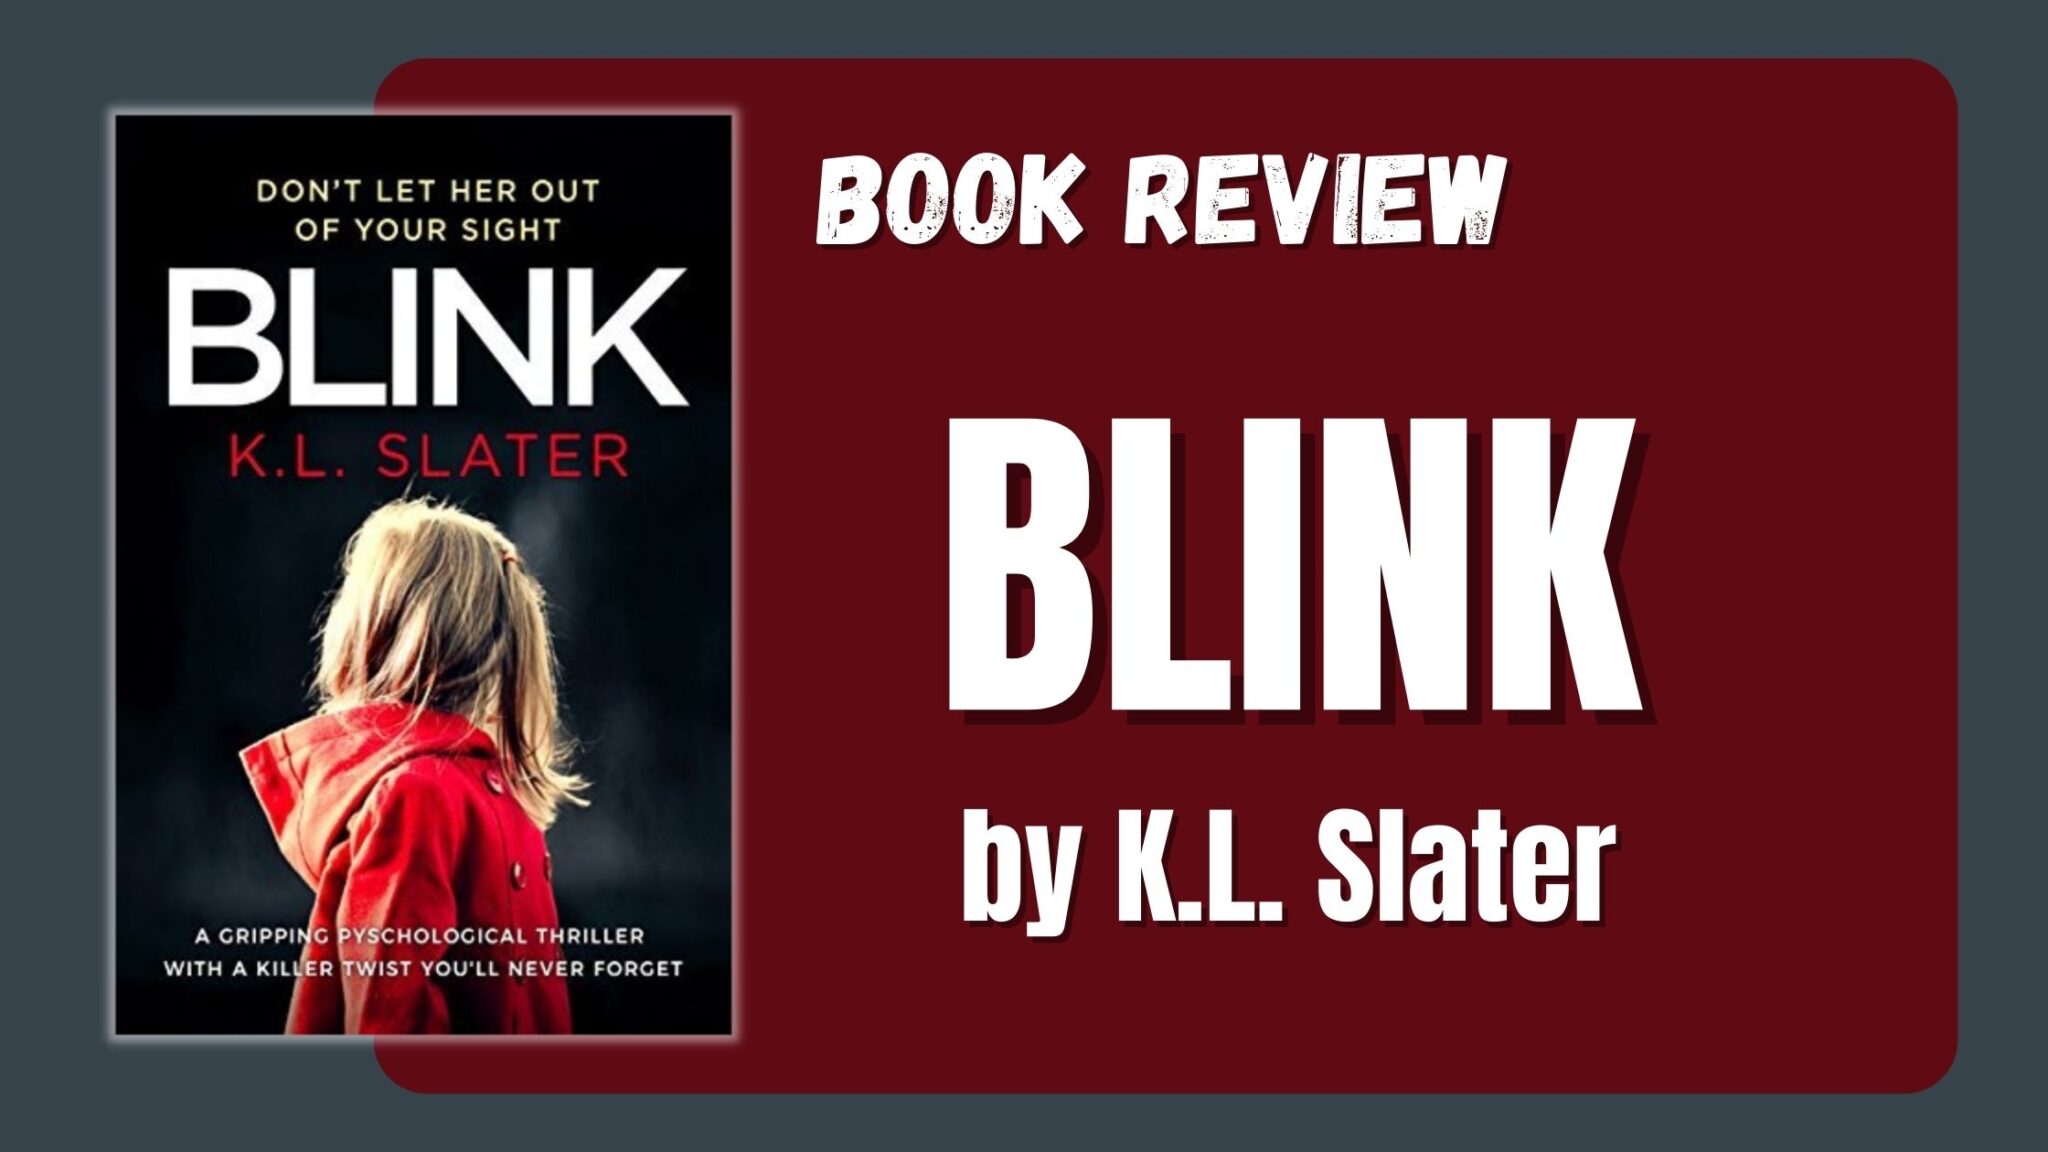 blink book review pdf